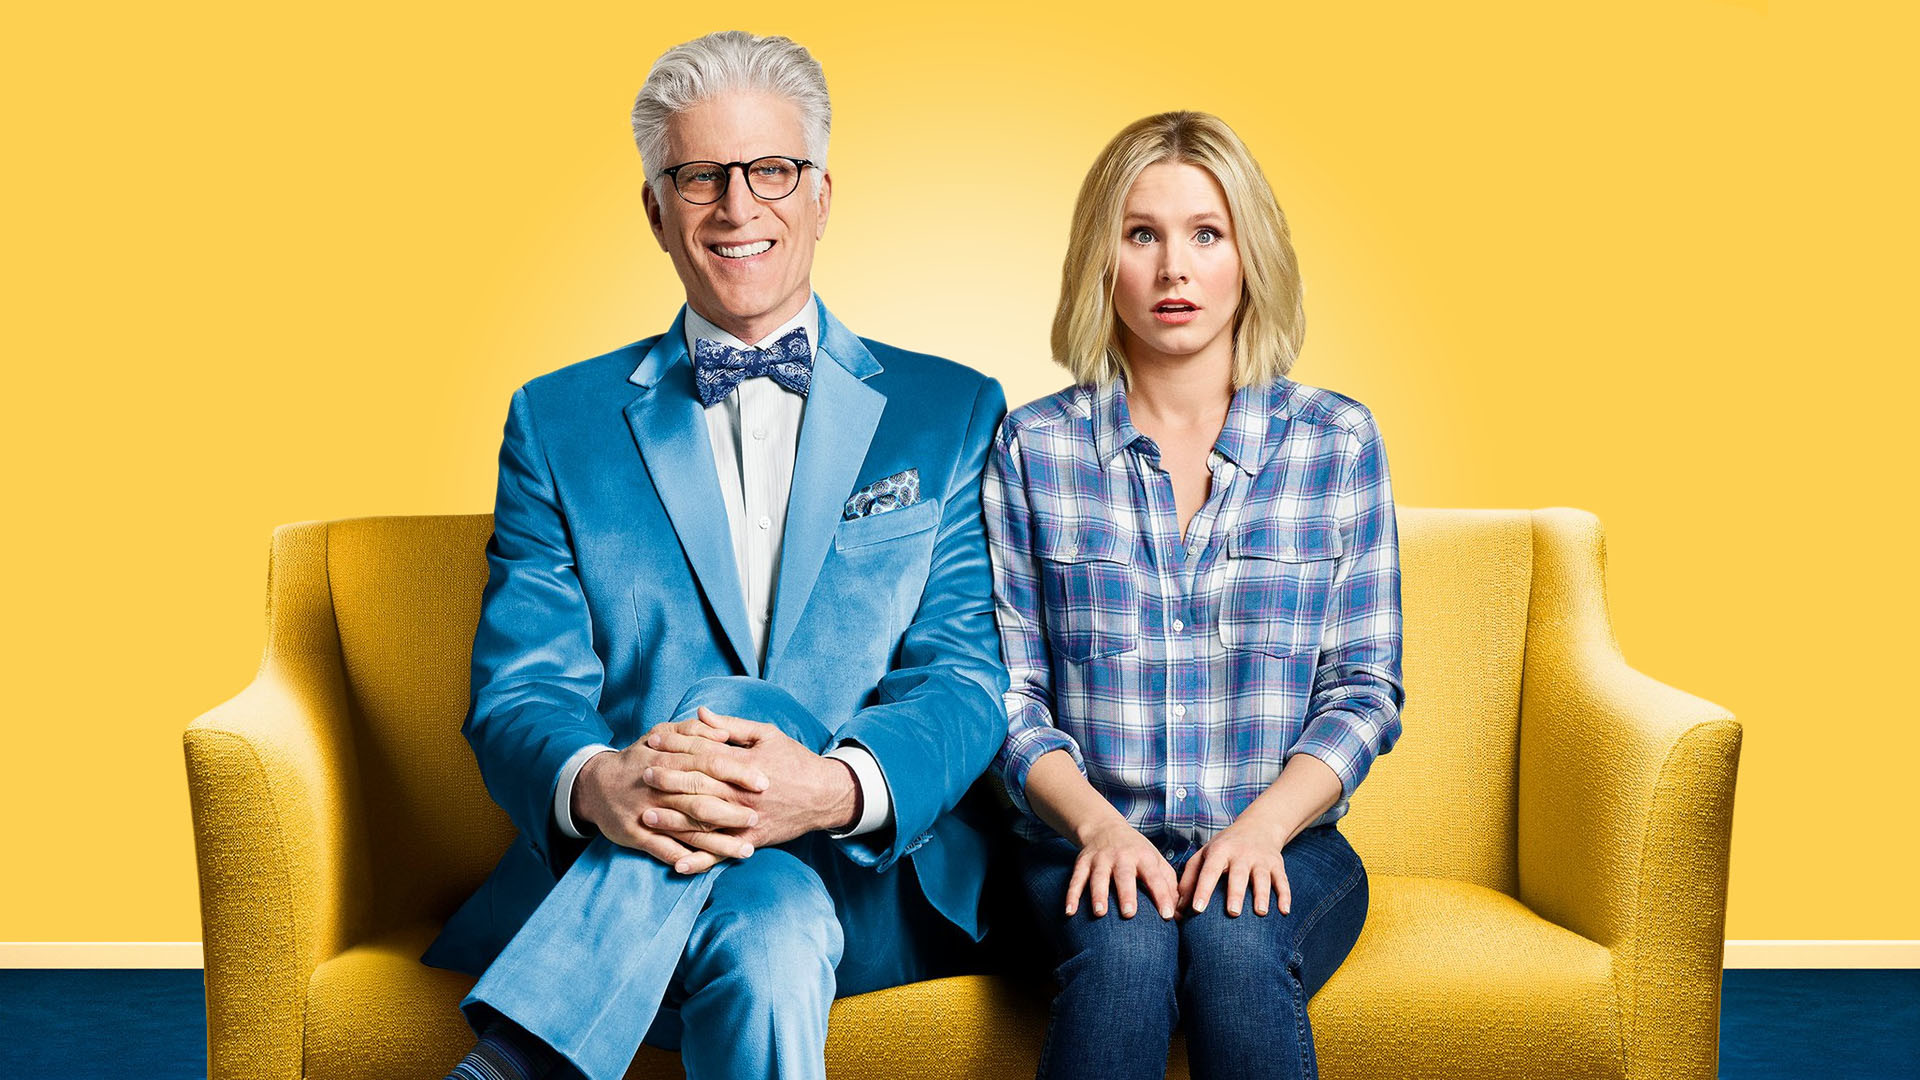 The Good Place #6